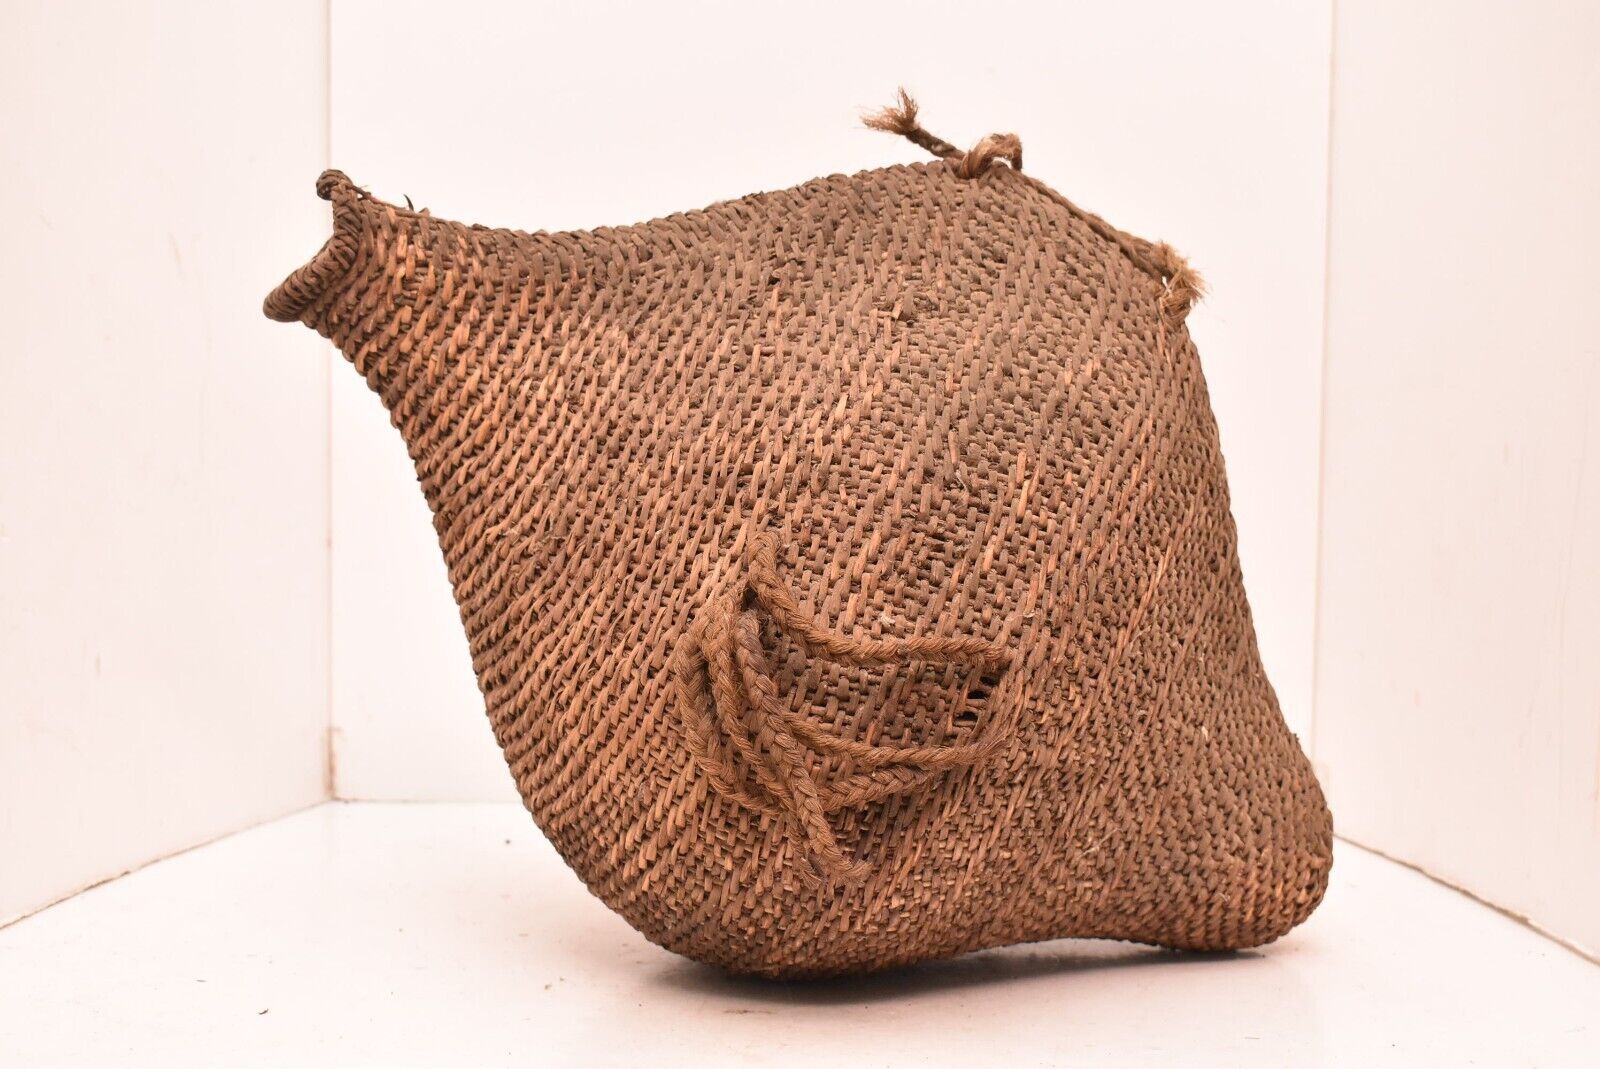 Antique 1800s Paiute Native American Indian Seed Carrier Basket Jug VTG Woven..=